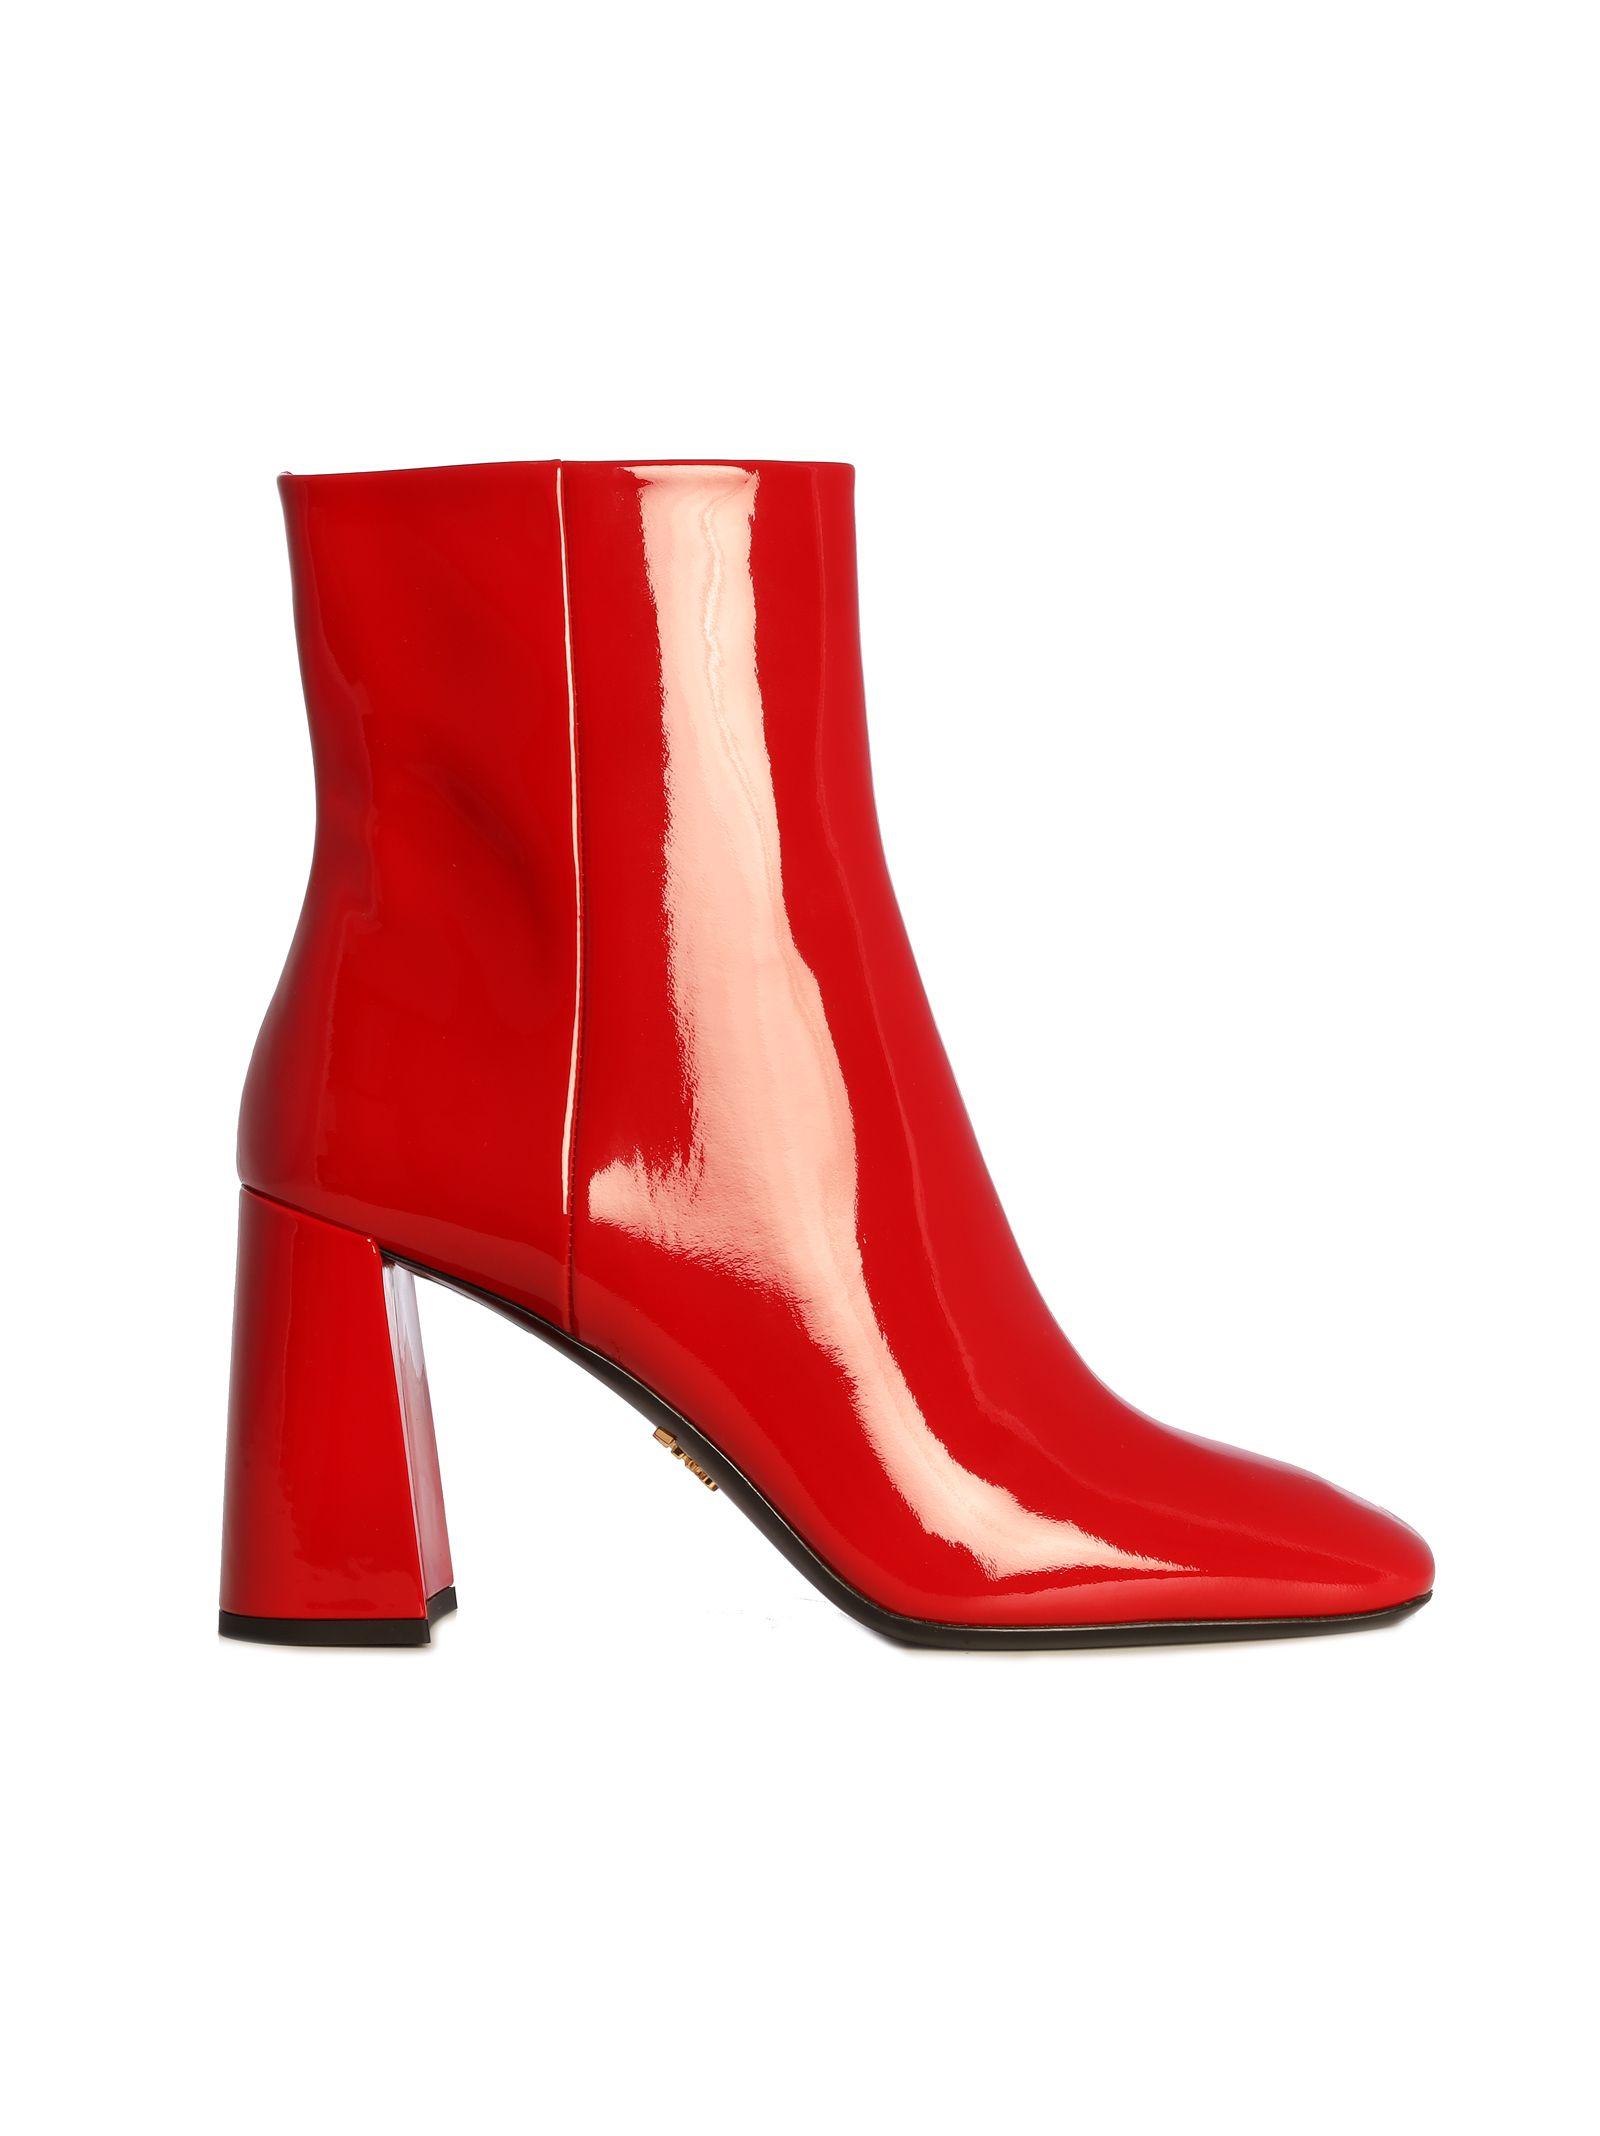 Prada Red Leather Ankle Boots - Lyst